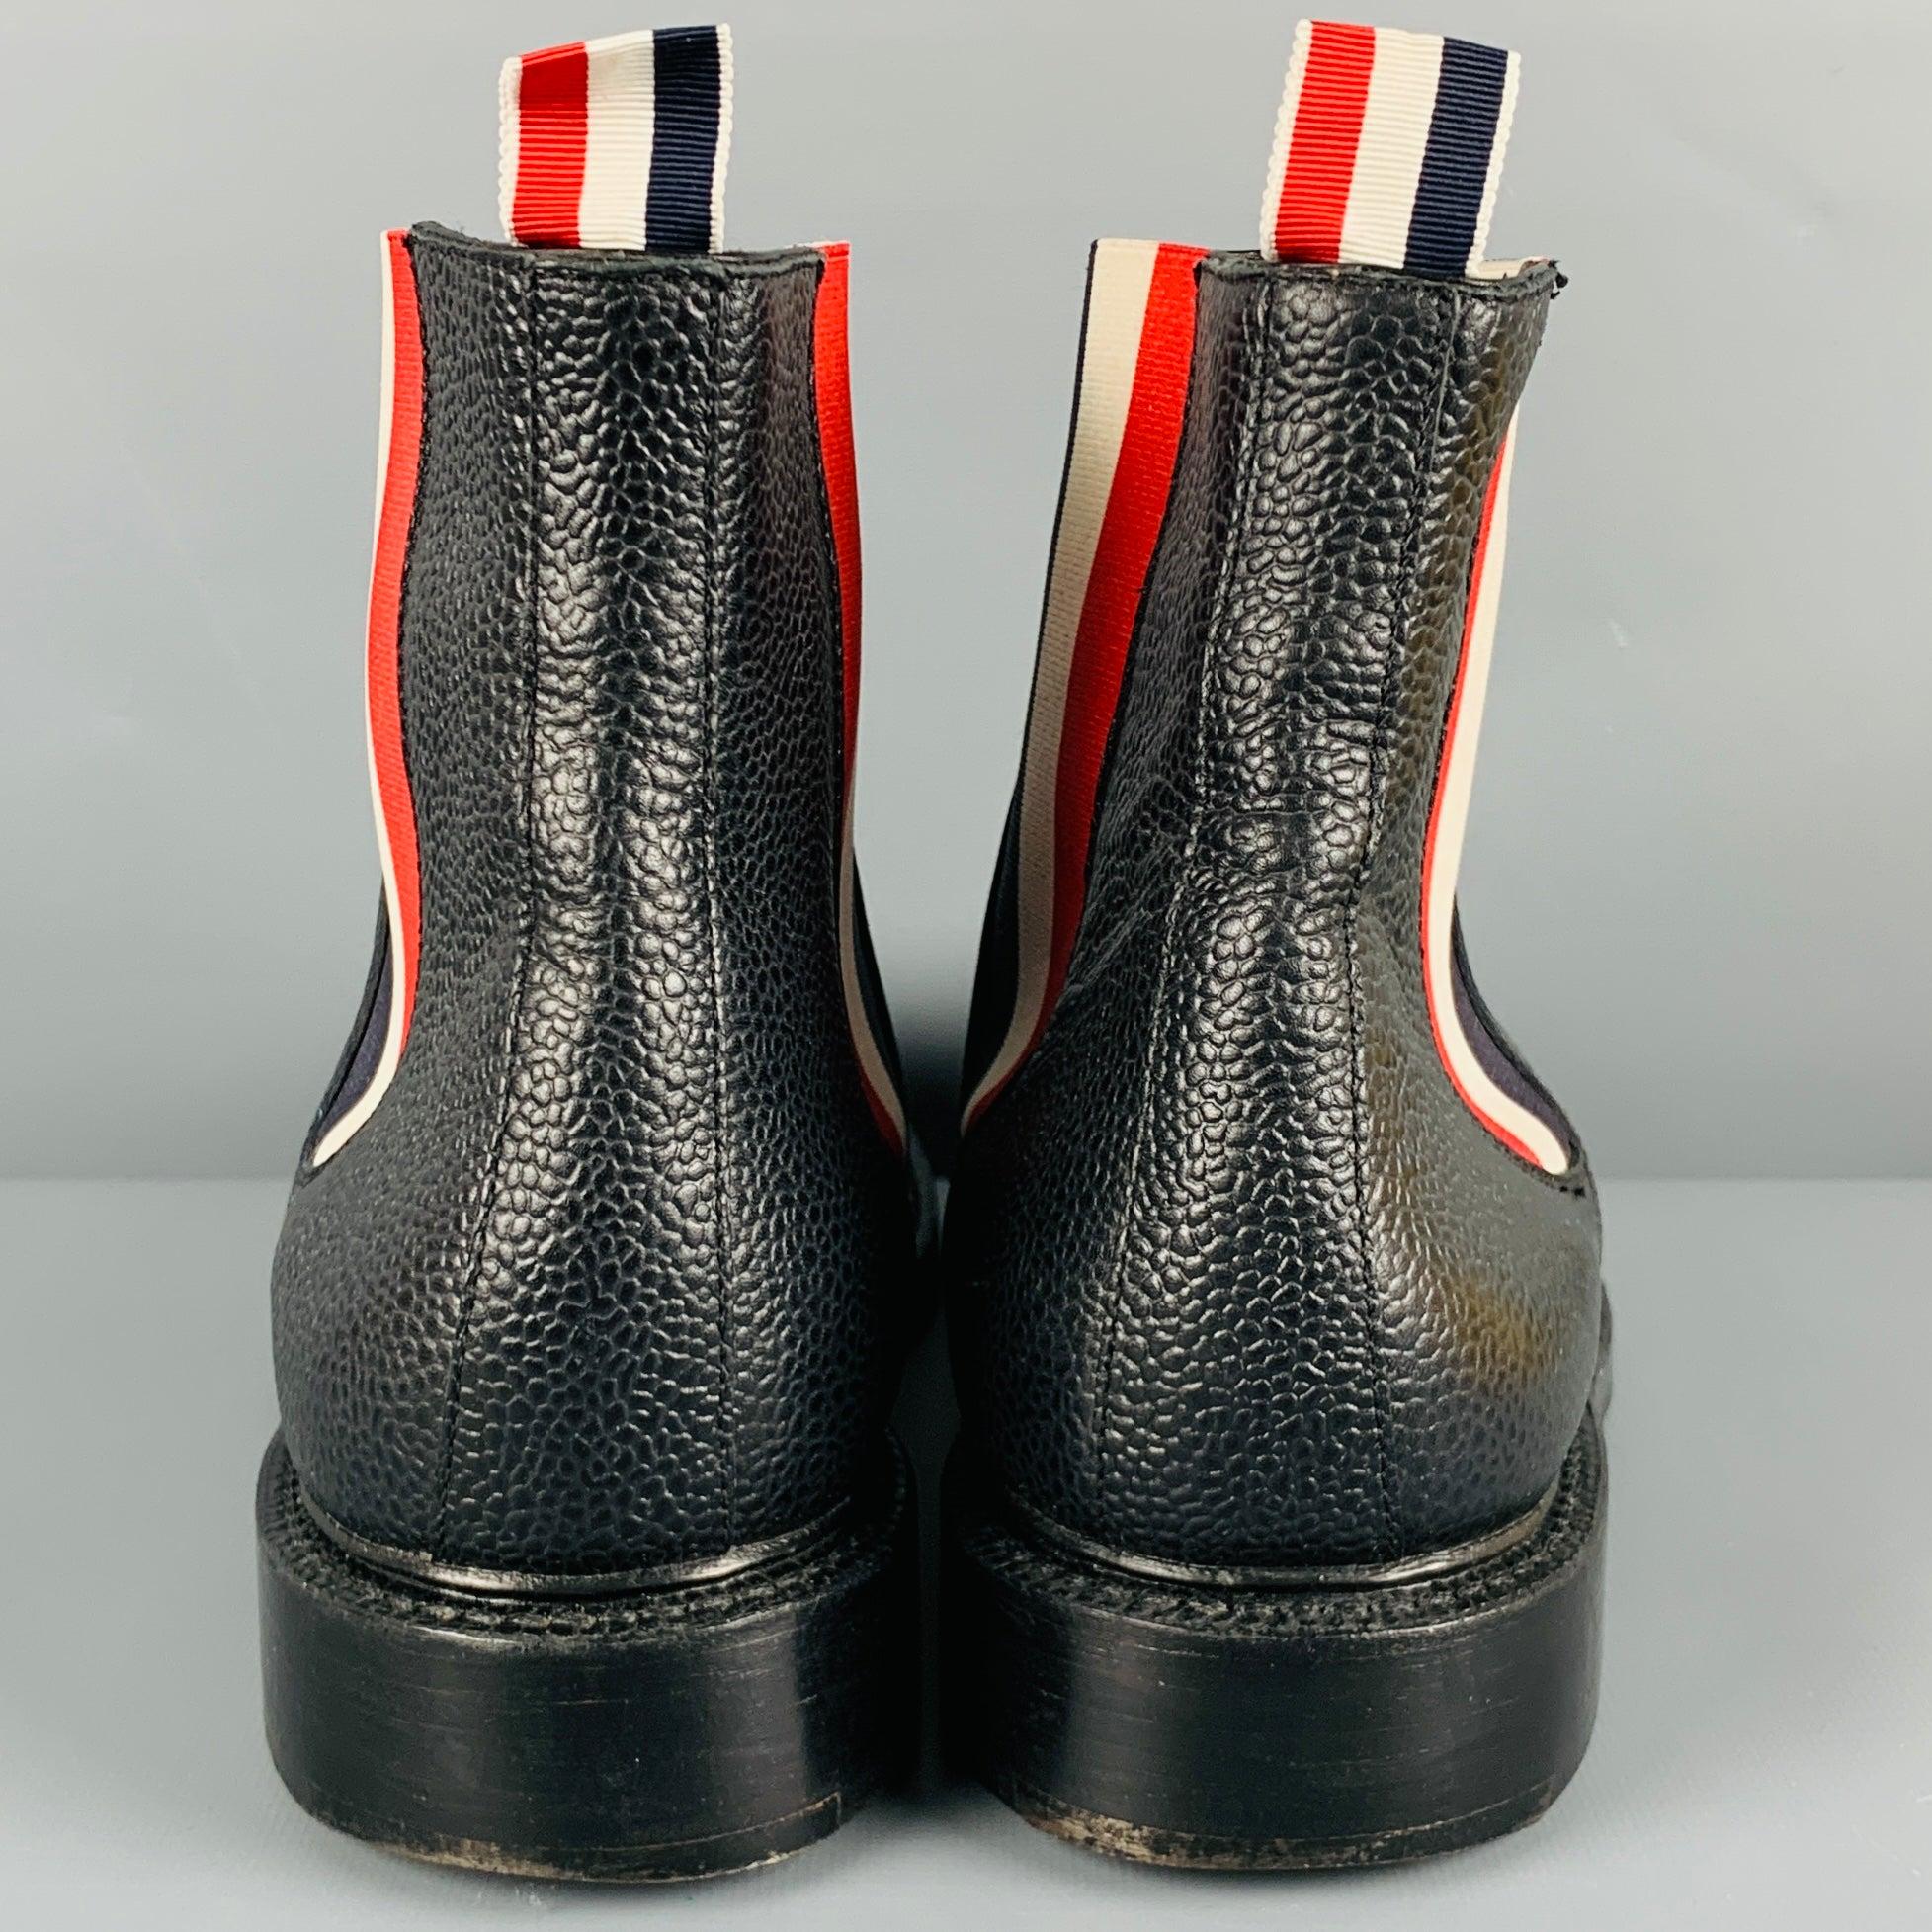 THOM BROWNE Size 9 Black Red White Chelsea Boots In Good Condition For Sale In San Francisco, CA